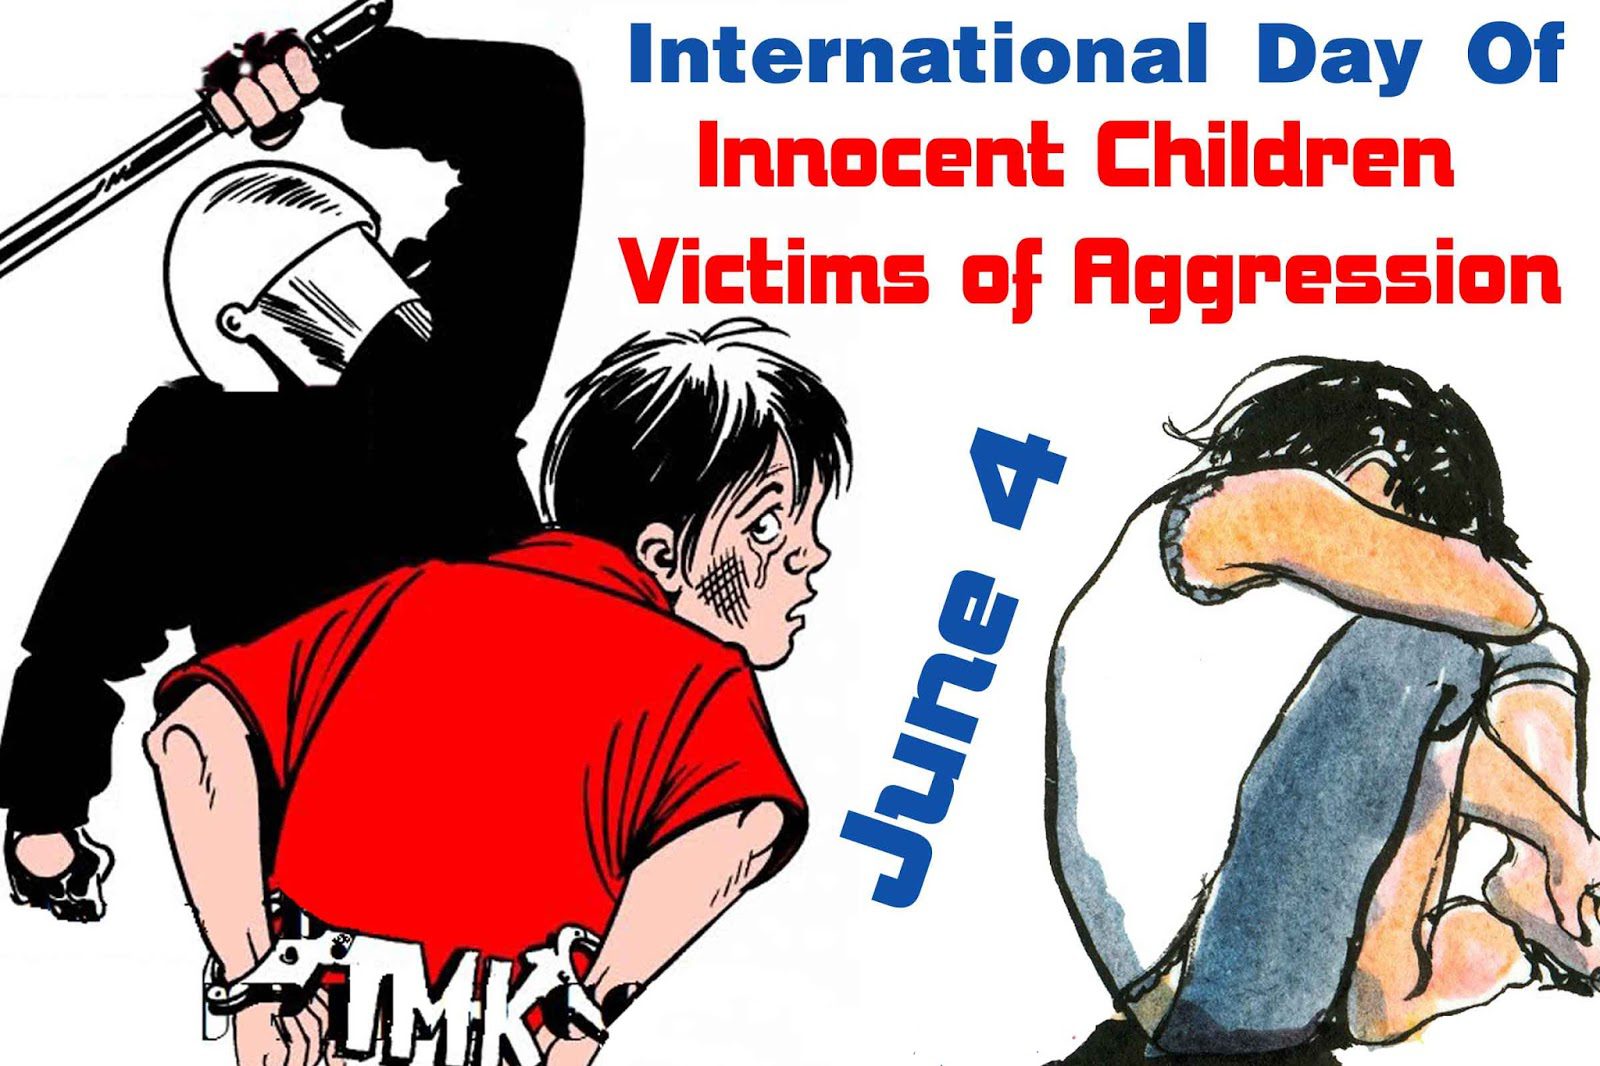 When is International Day of Innocent Children Victims of Aggression This Year 